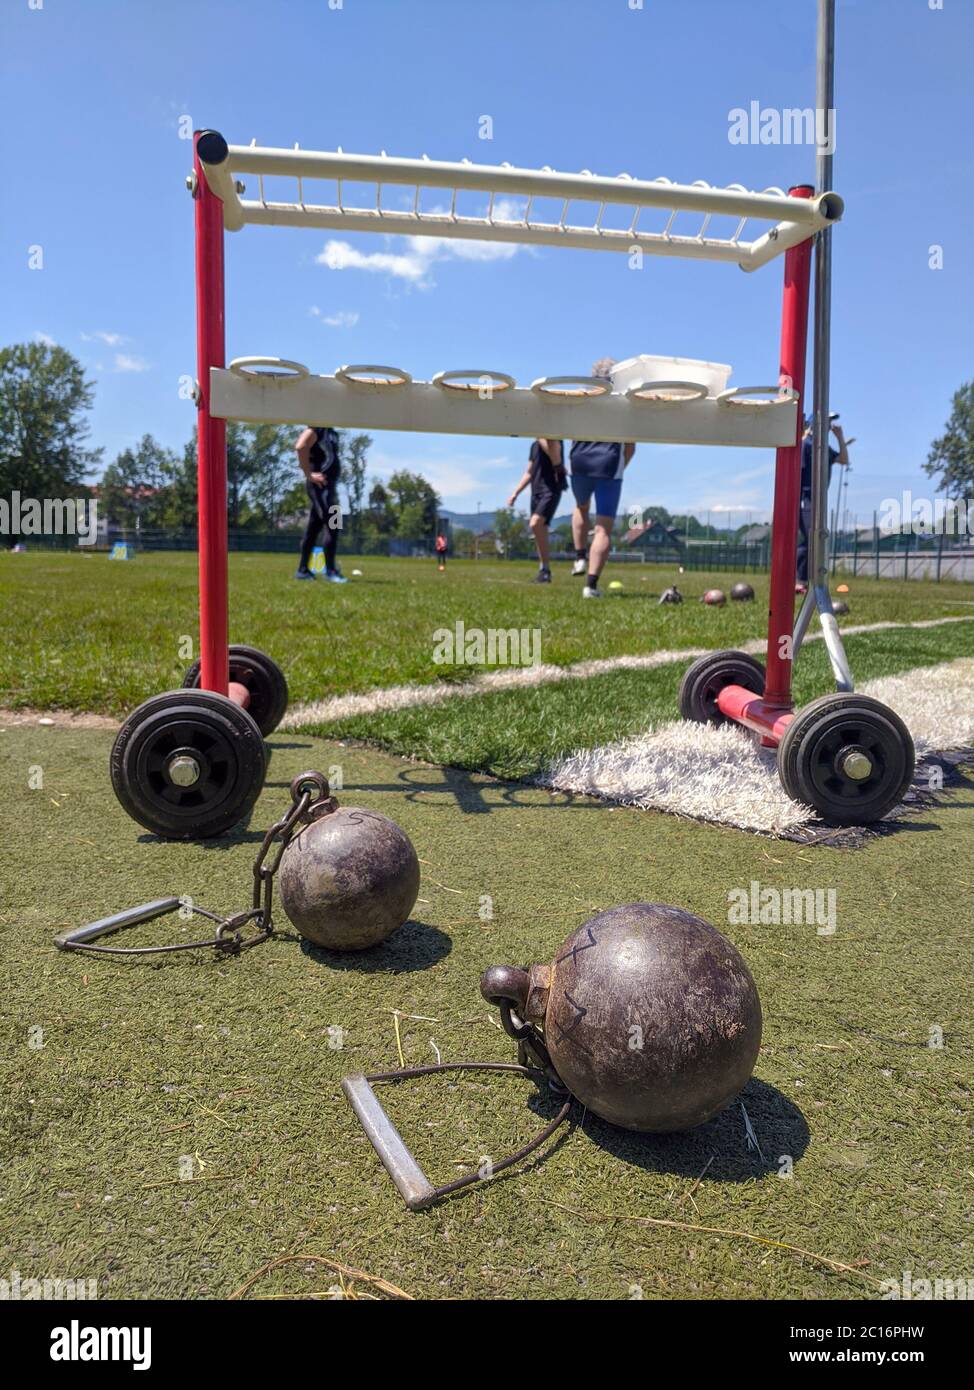 Weight throw implements with athletes in the background preparing to throw them Stock Photo